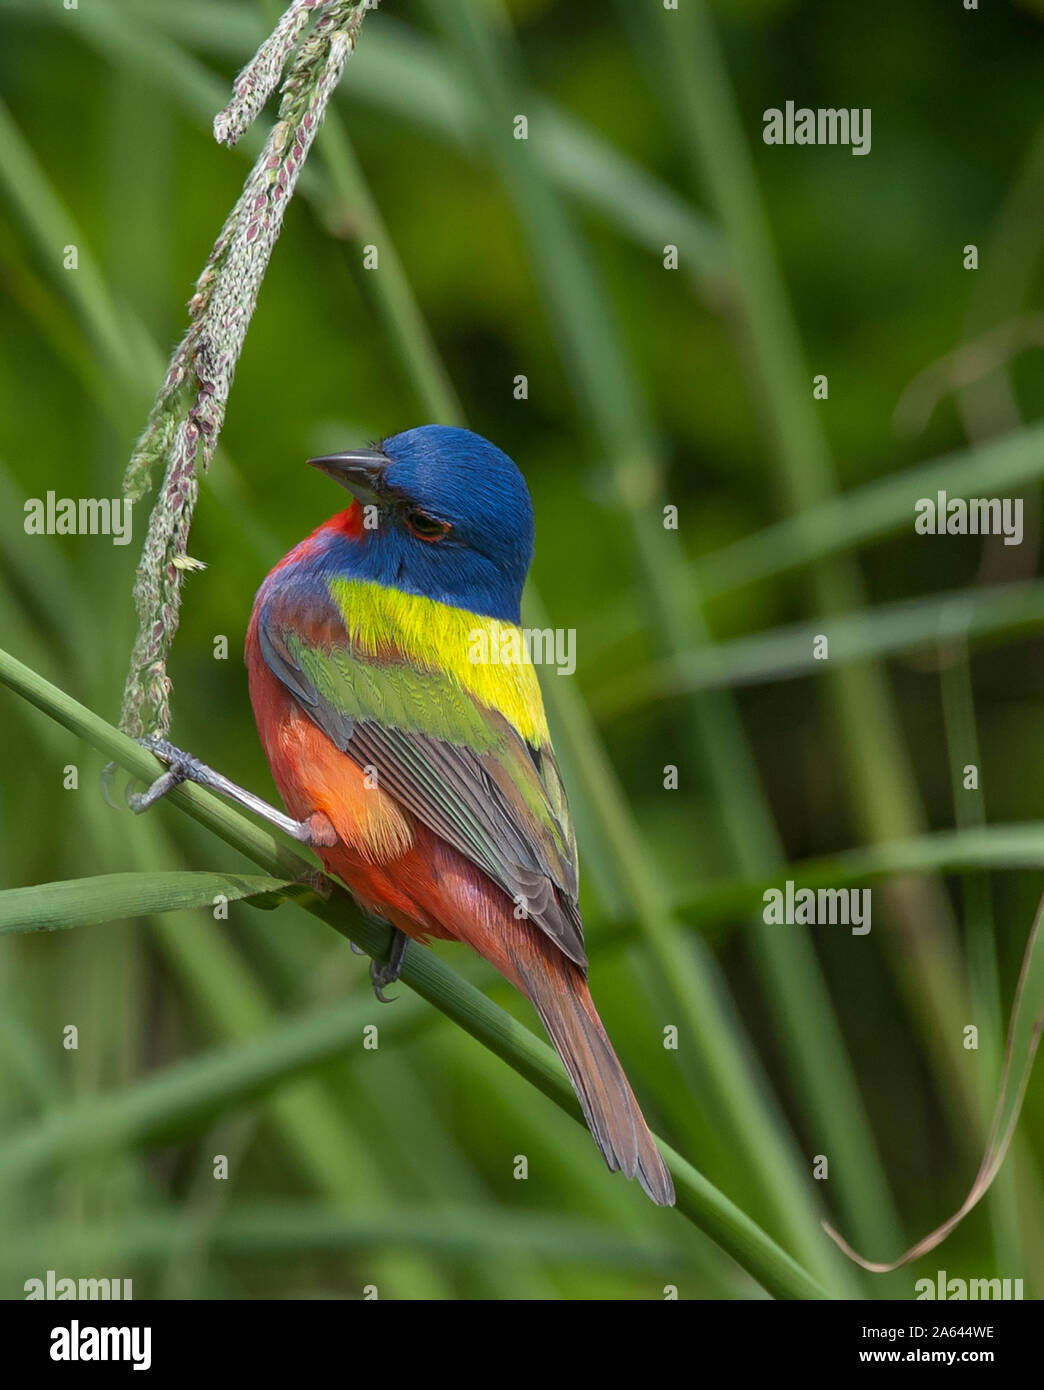 One of the most colorful birds of North America, this Painted Bunting was found in the Lafitte's Cove Nature Preserve on Galveston Island in Texas. Stock Photo